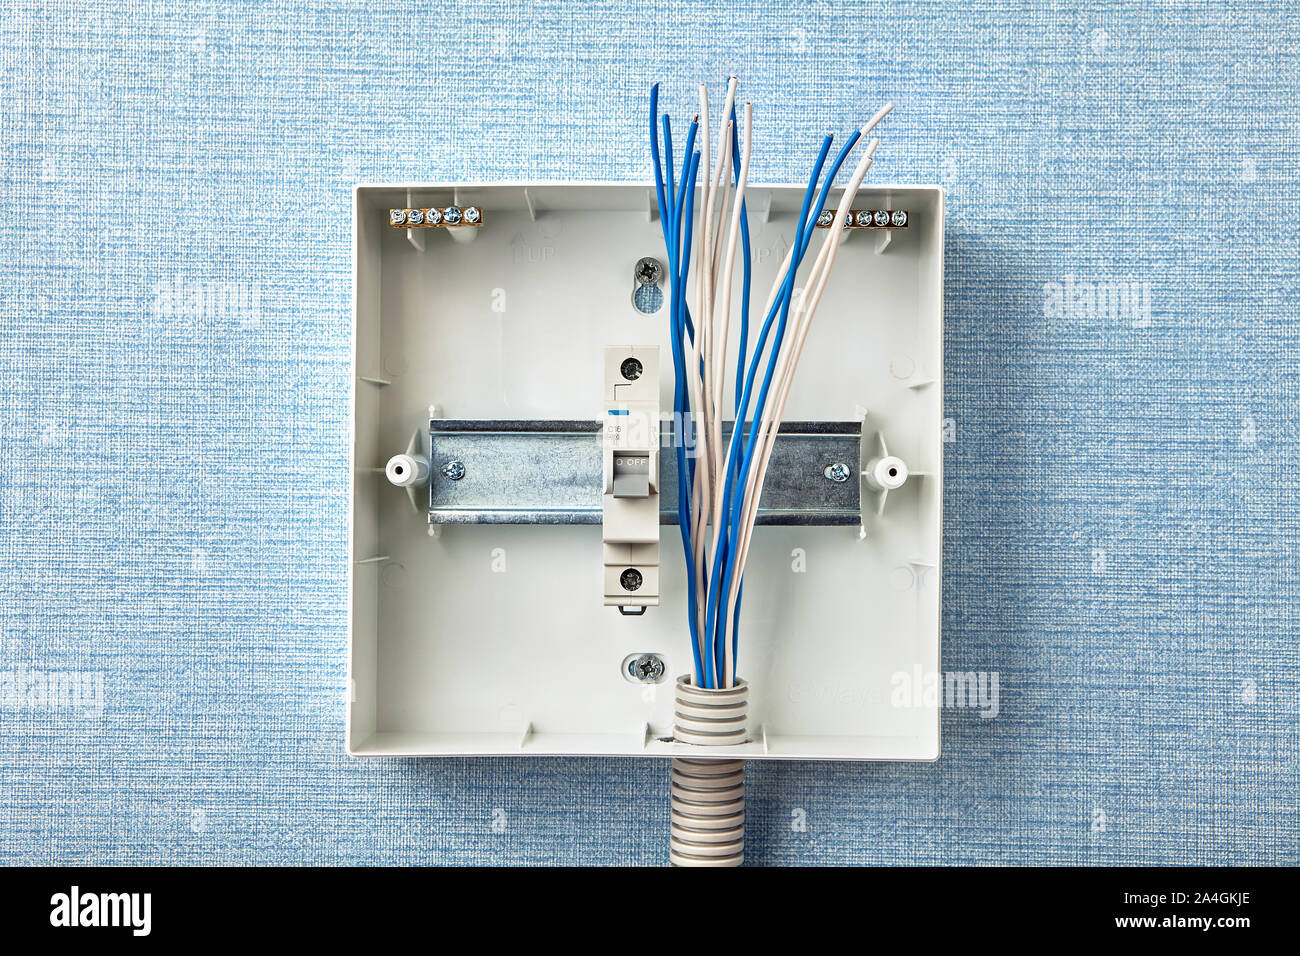 Electrical services to fuse board upgrades. Electricity supply and consumer unit in a house. Metal mounting straight edge guide DIN rail. Home circuit Stock Photo